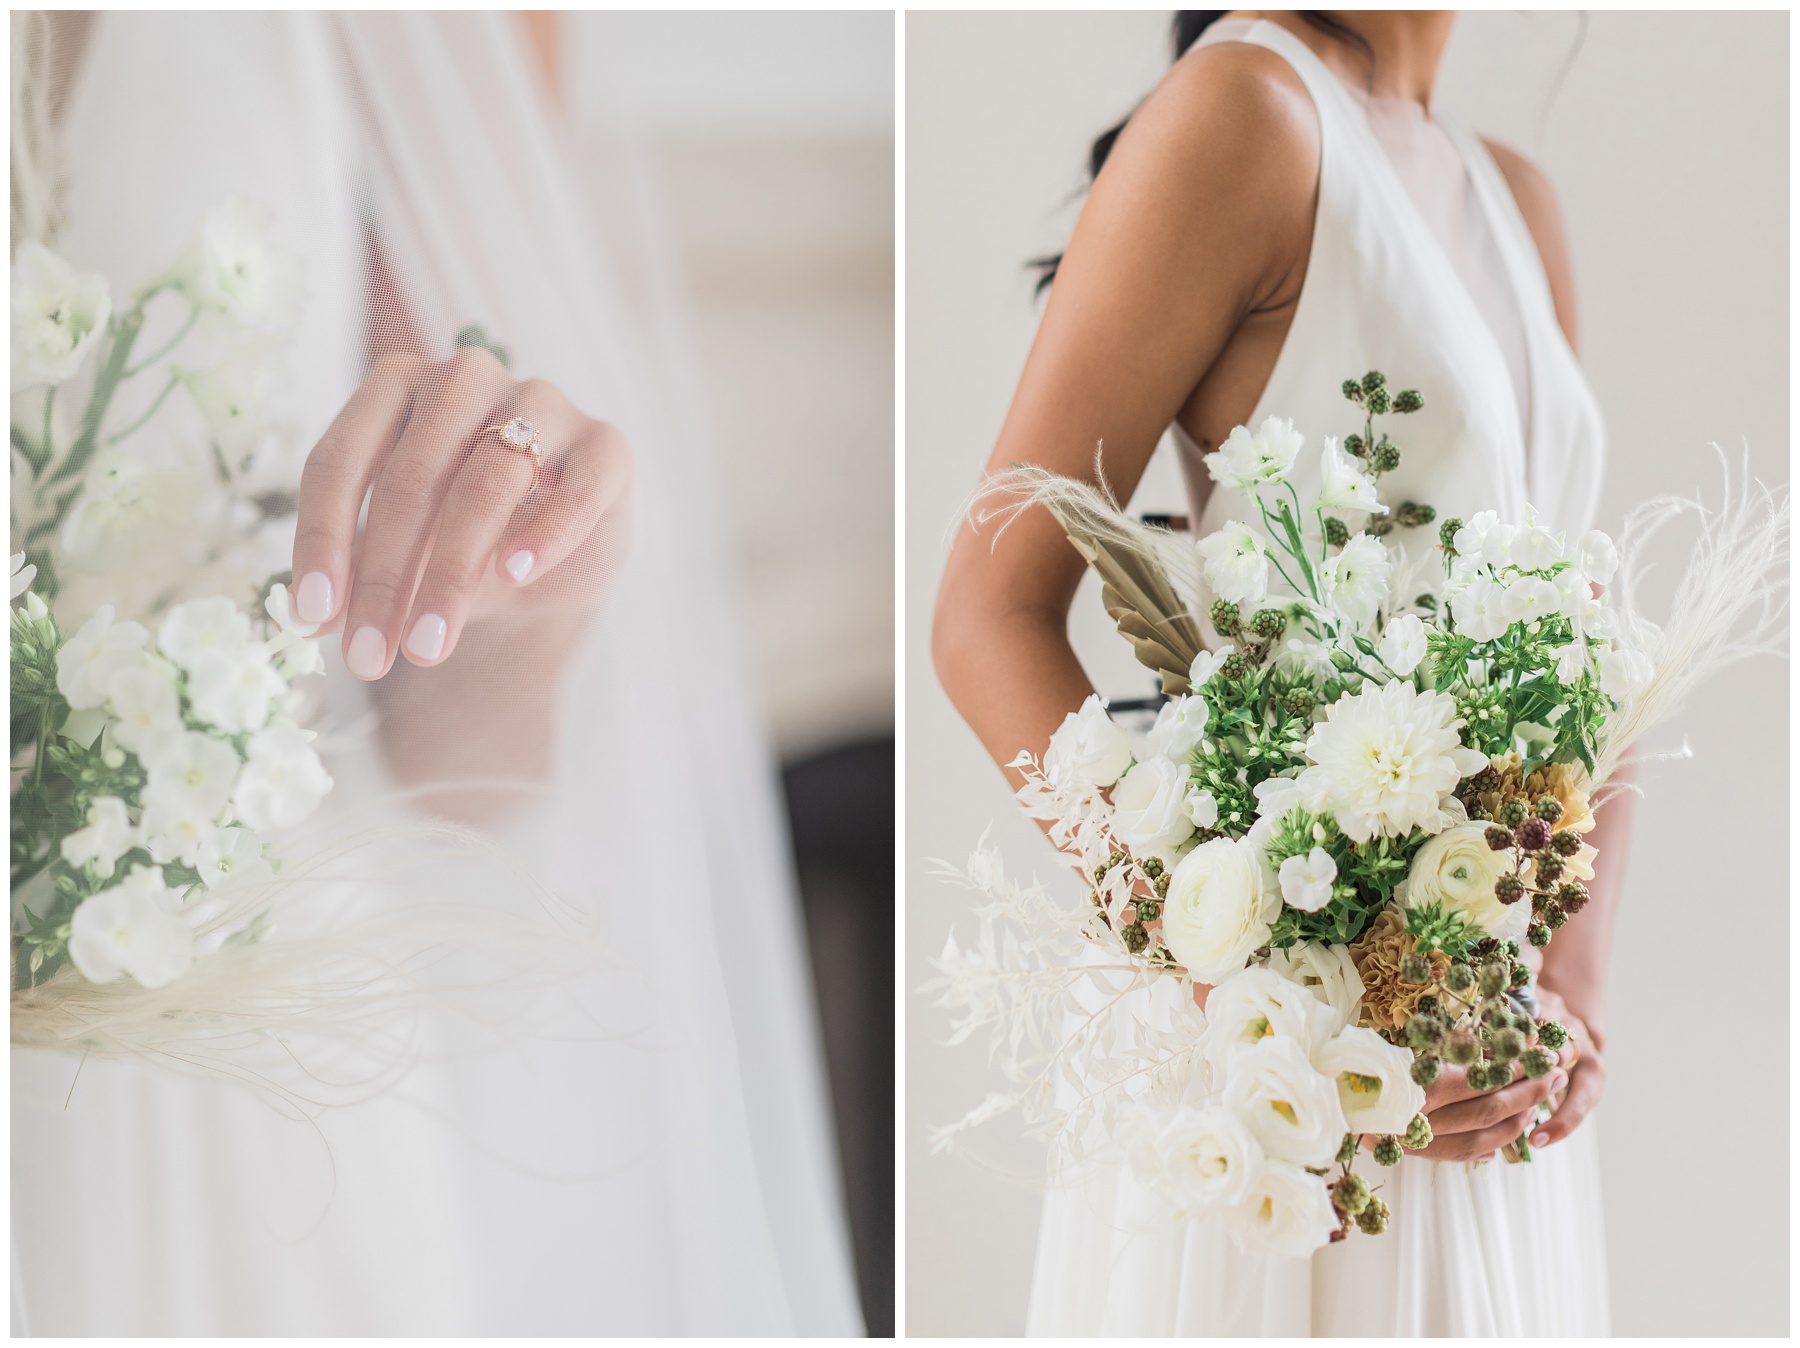 Neutral bridal bouquet with white flowers and tan textured details